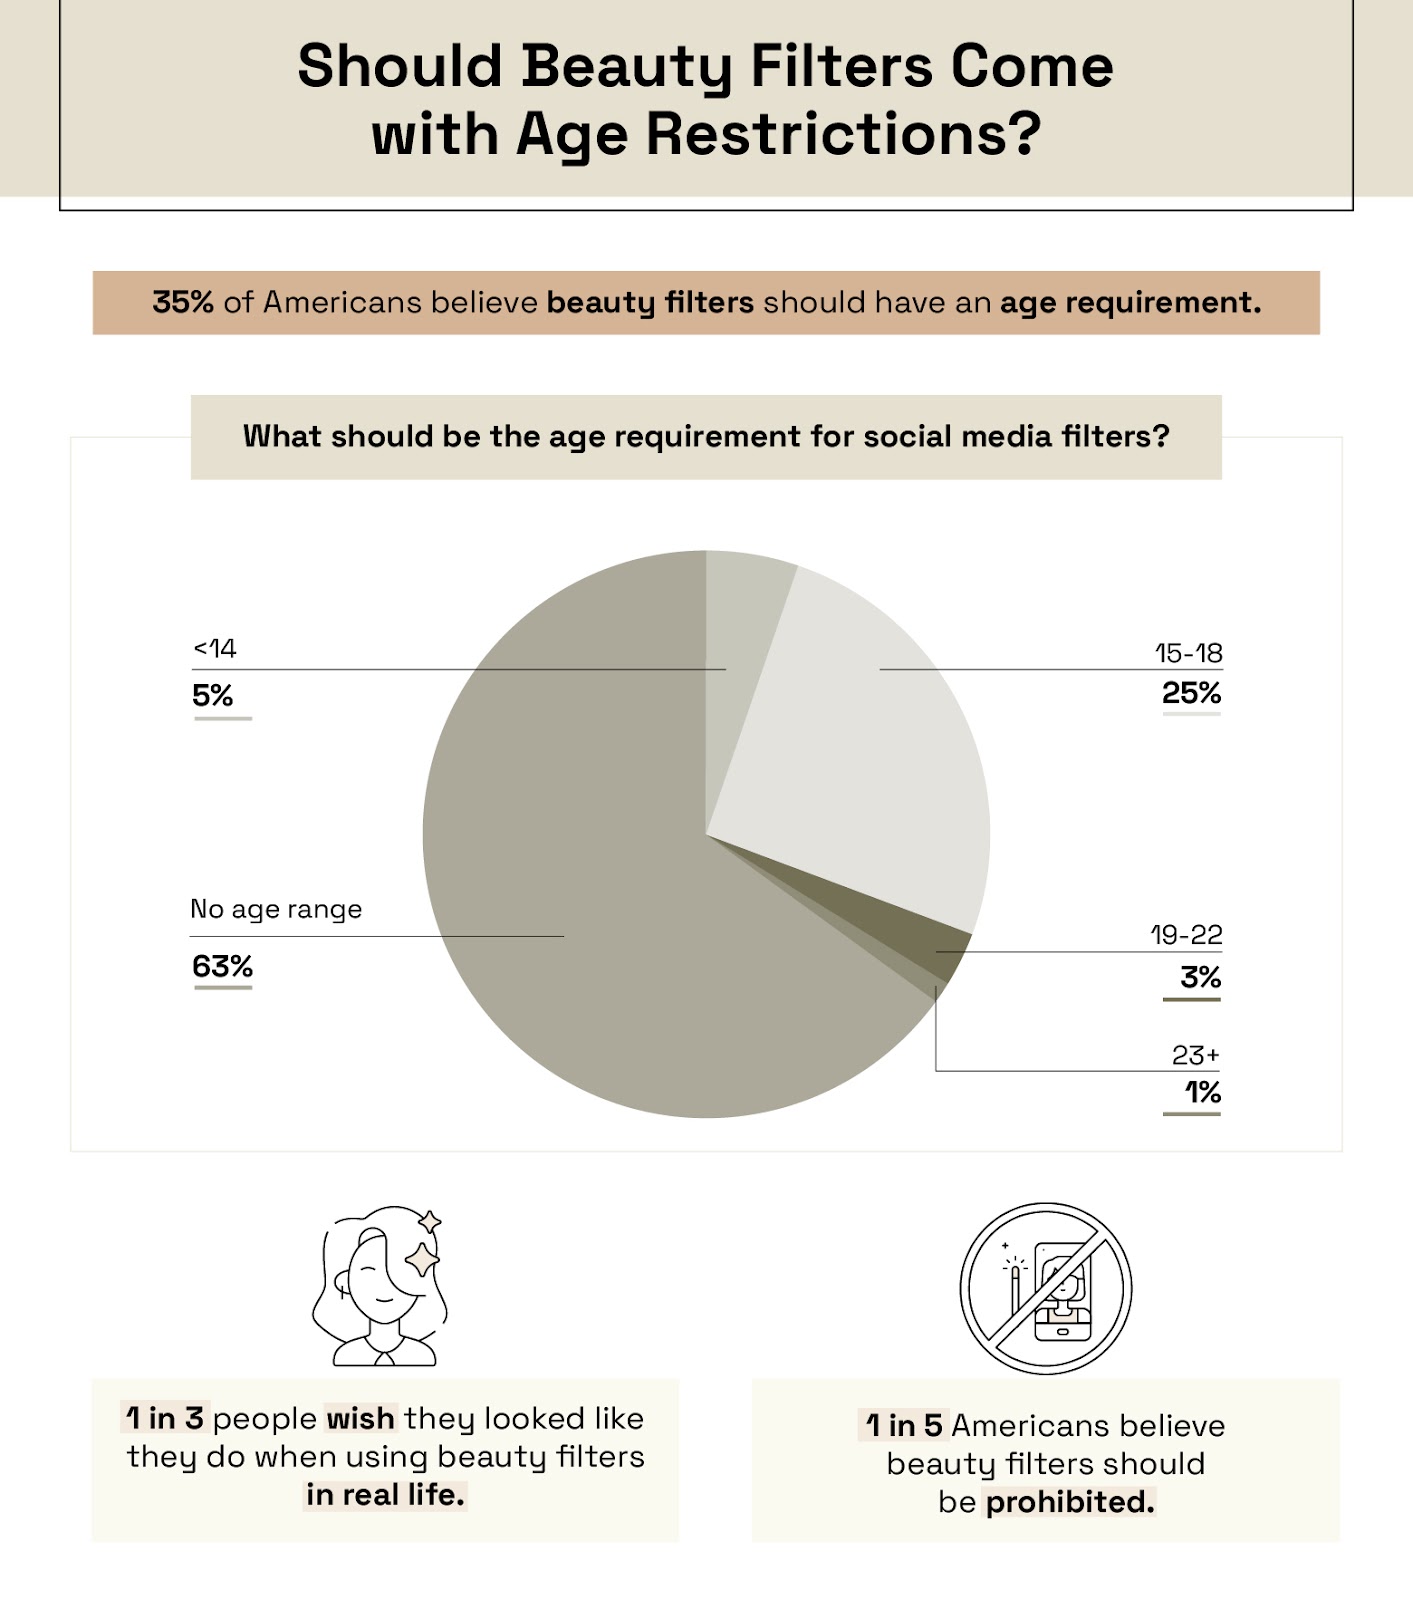 Pie chart depicting the age restrictions Americans feel should be on beauty filters